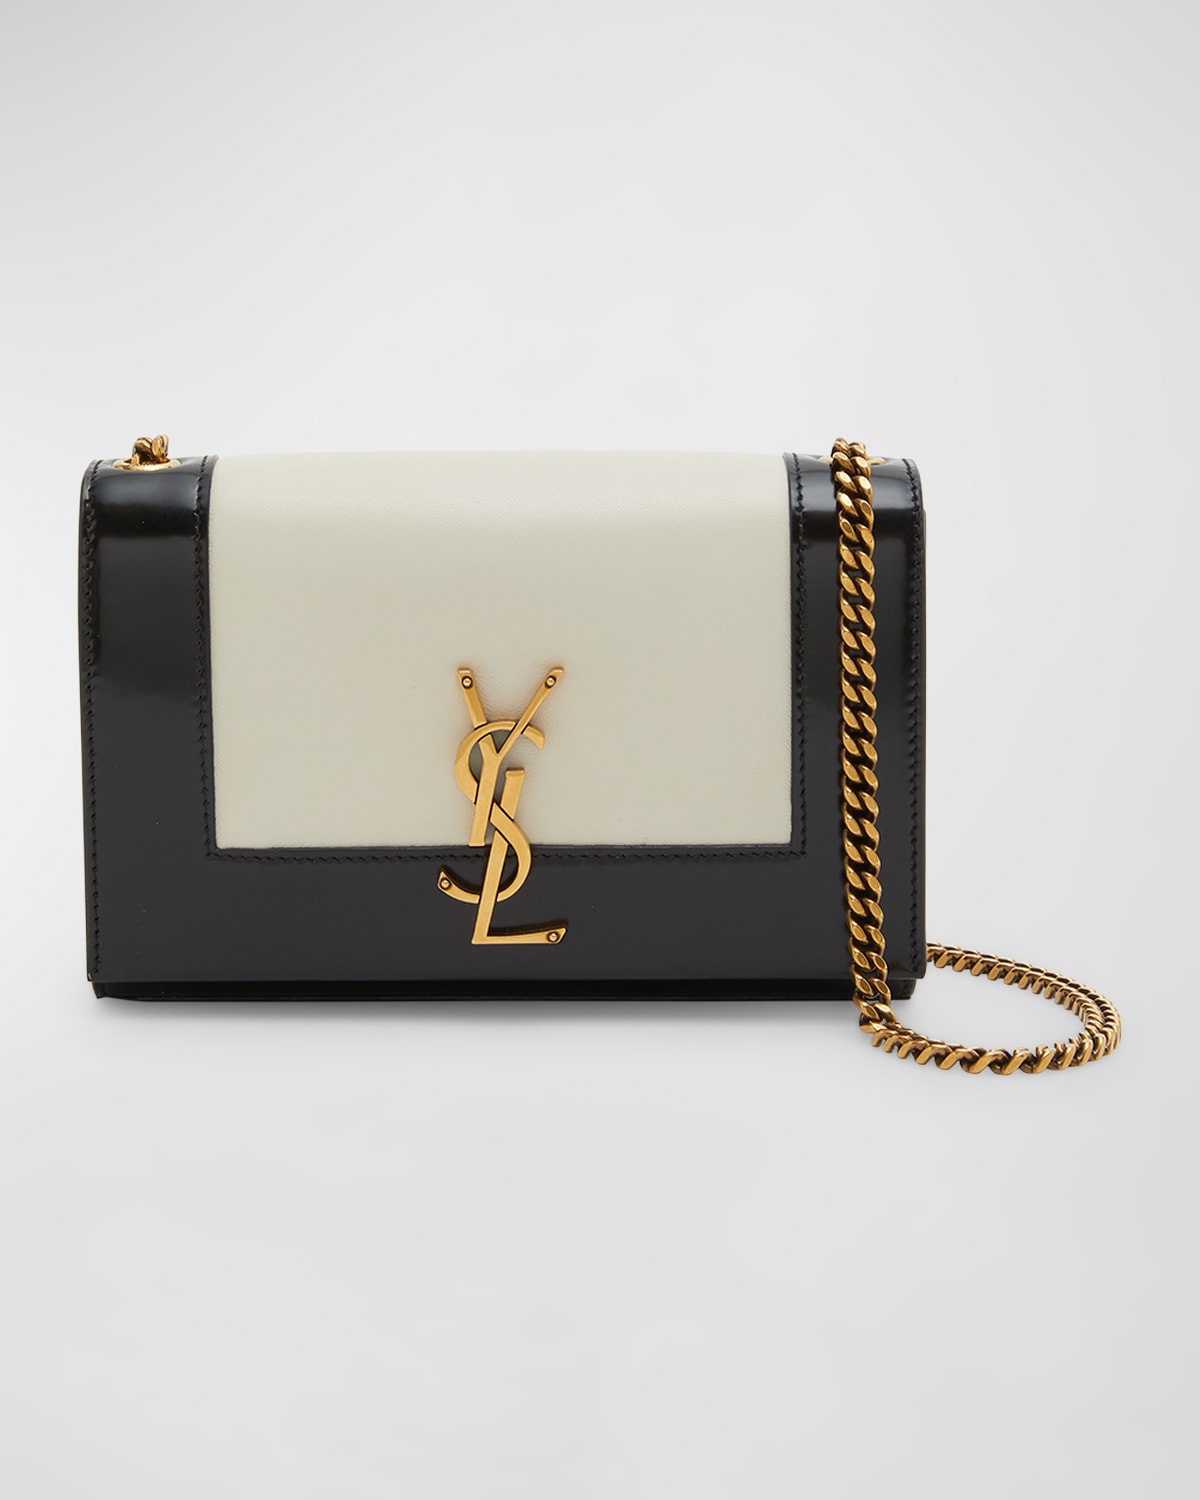 SAINT LAURENT KATE SMALL YSL CROSSBODY BAG IN SMOOTH LEATHER